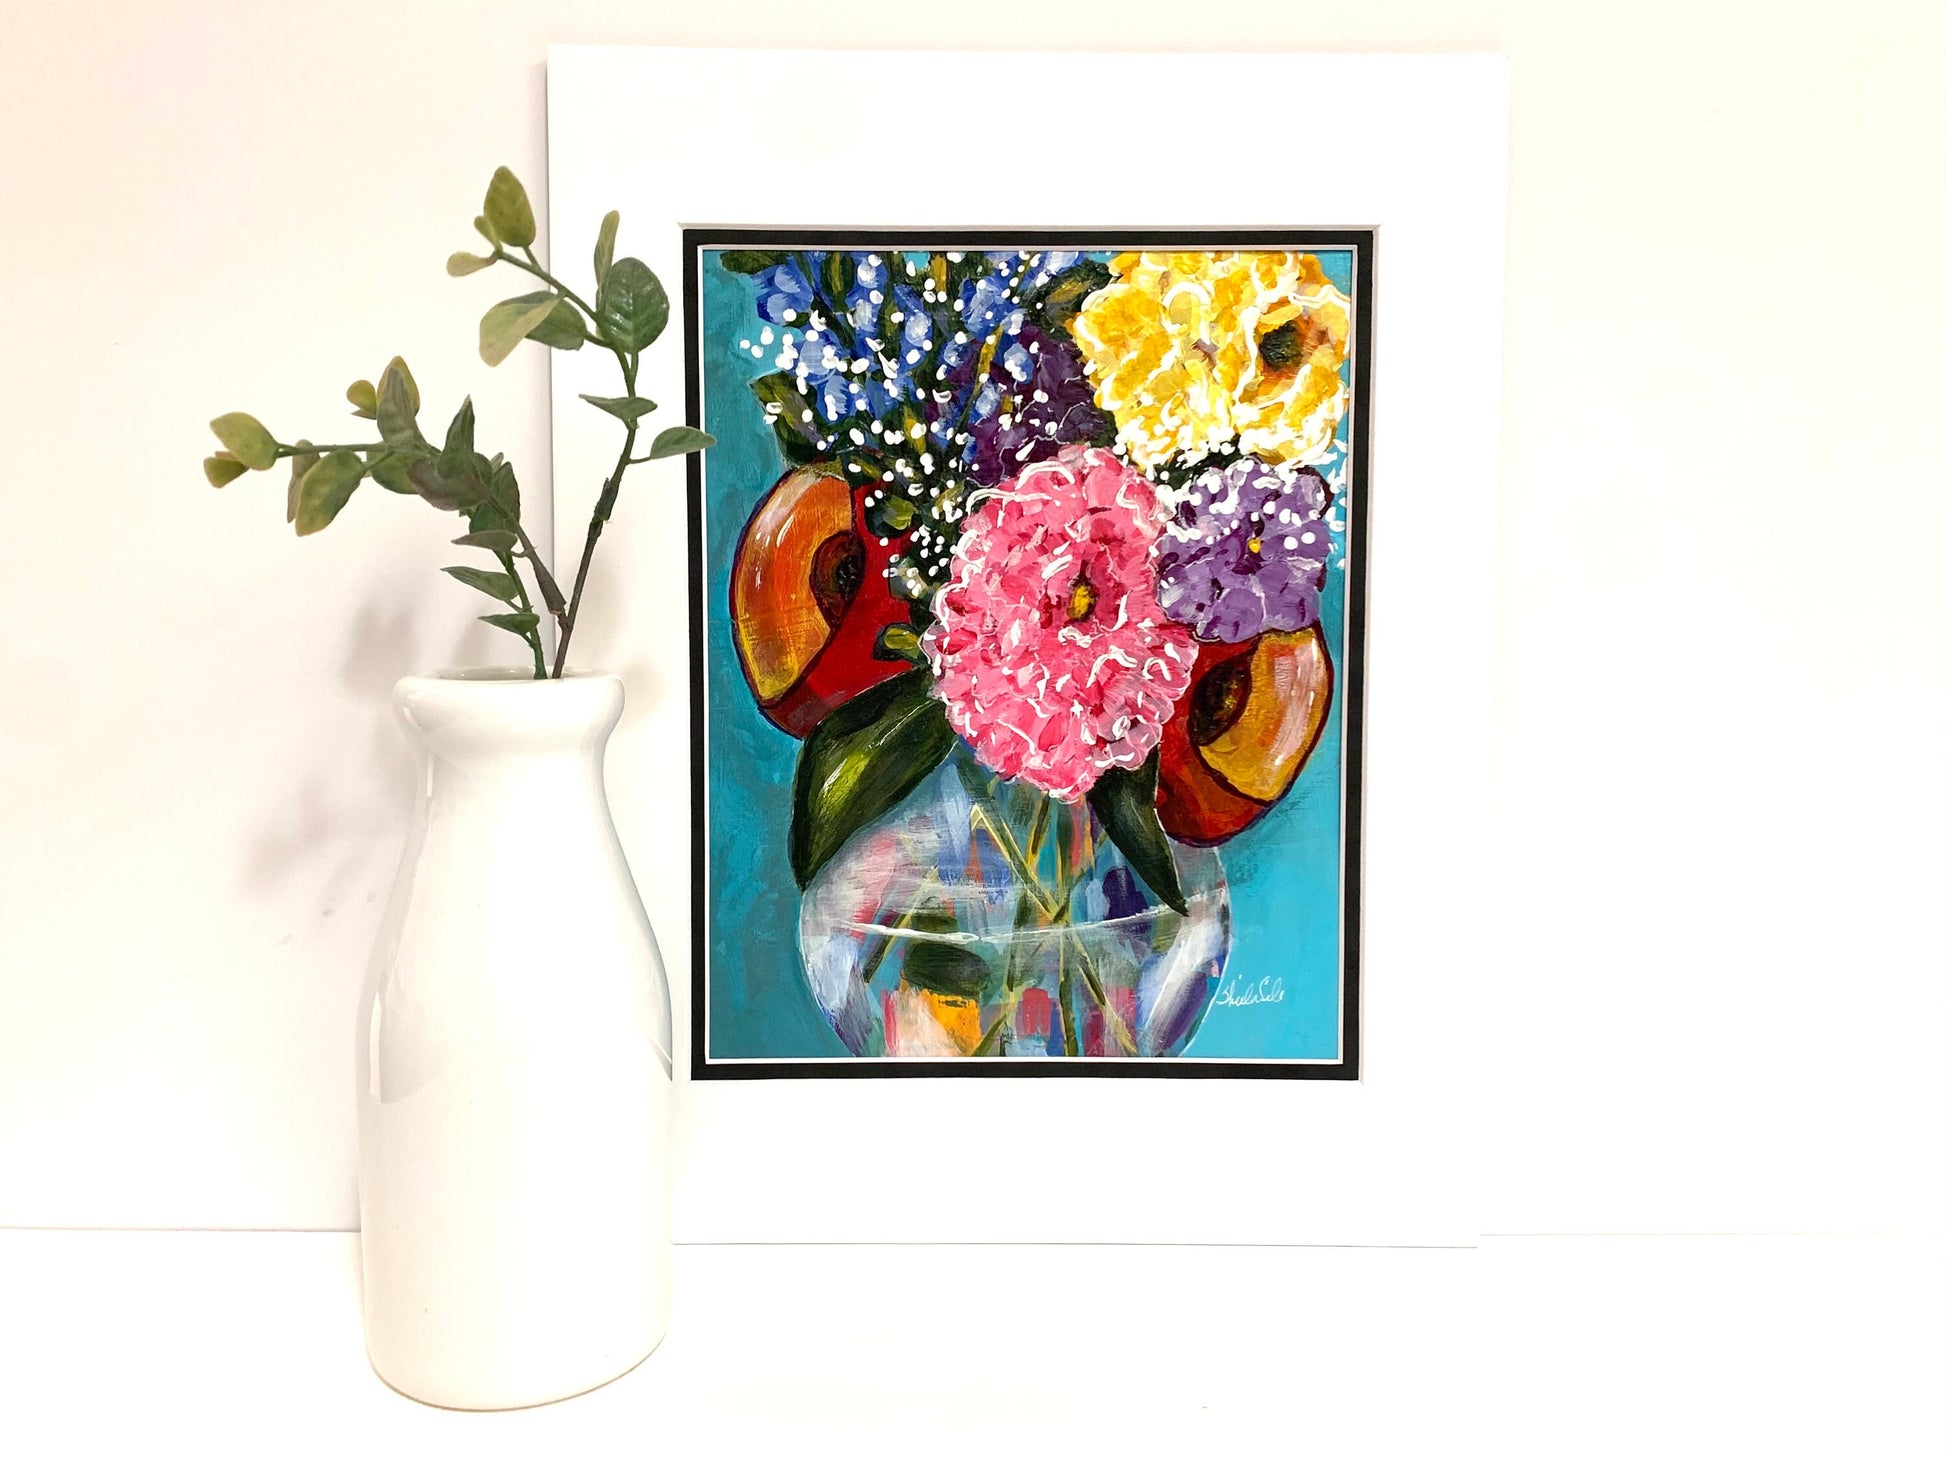 Autumn Flower Bouquet in Vase Painting on Teal paper background Home wall decor Original art Ready to Frame